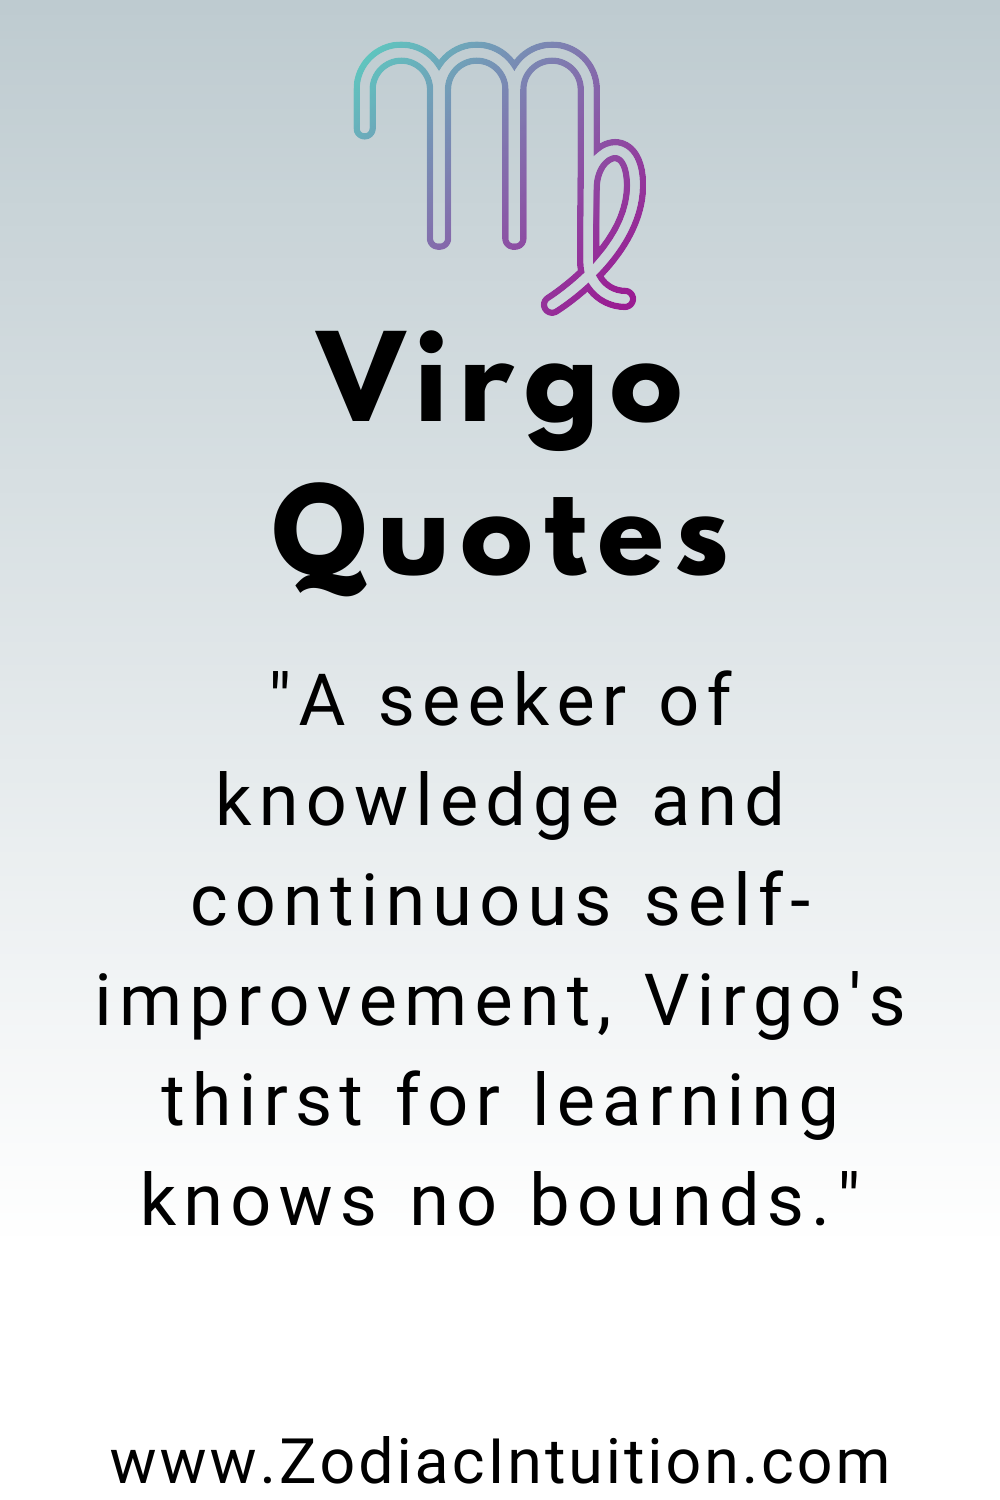 Top 5 Virgo Quotes And Inspiration